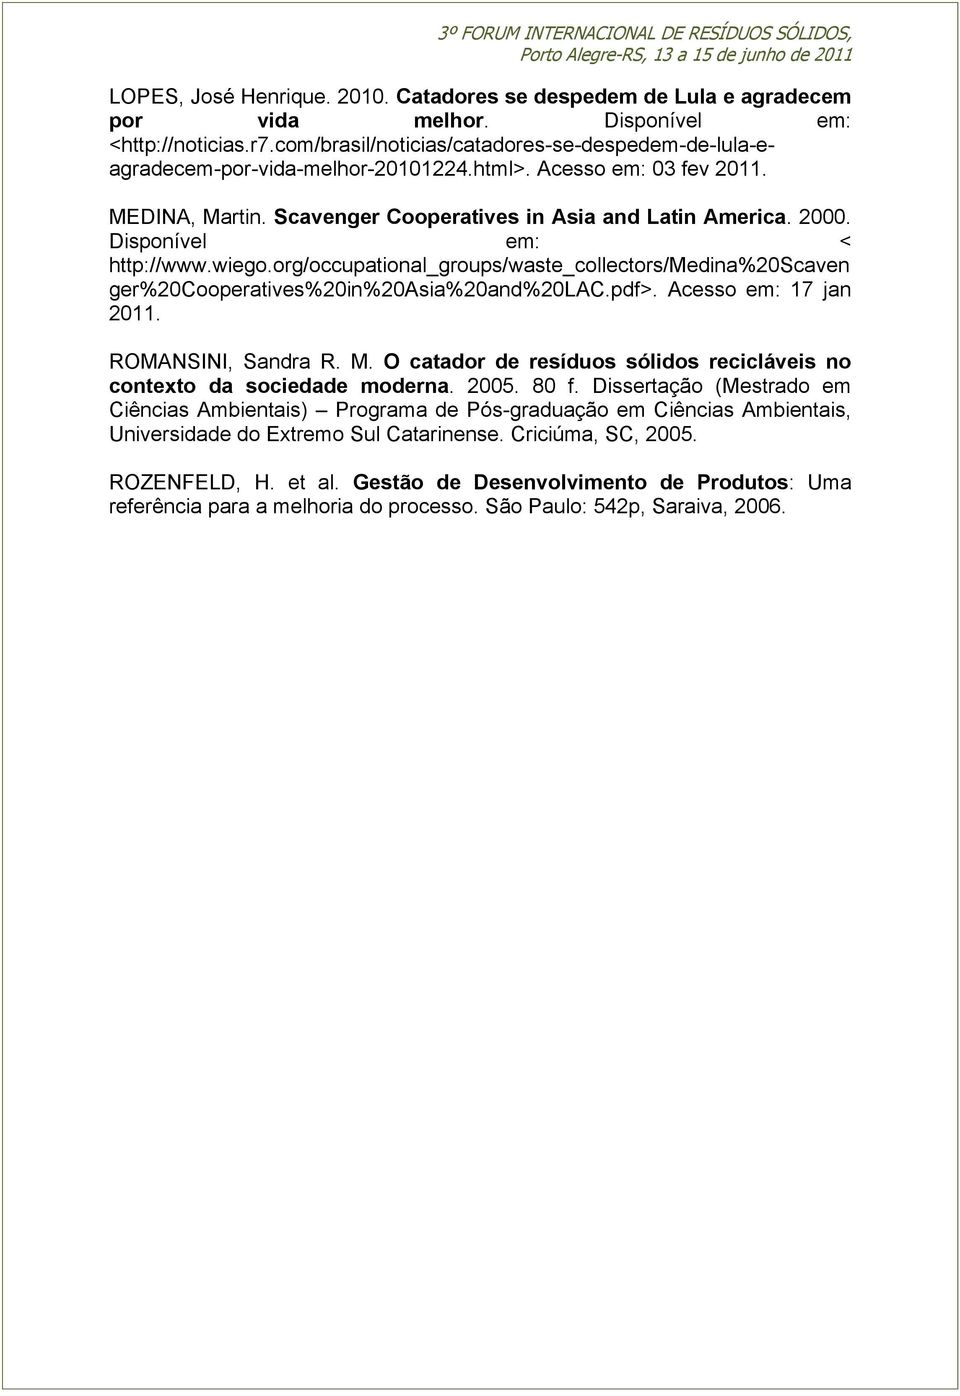 Disponível em: < http://www.wiego.org/occupational_groups/waste_collectors/medina%20scaven ger%20cooperatives%20in%20asia%20and%20lac.pdf>. Acesso em: 17 jan 2011. ROMANSINI, Sandra R. M.